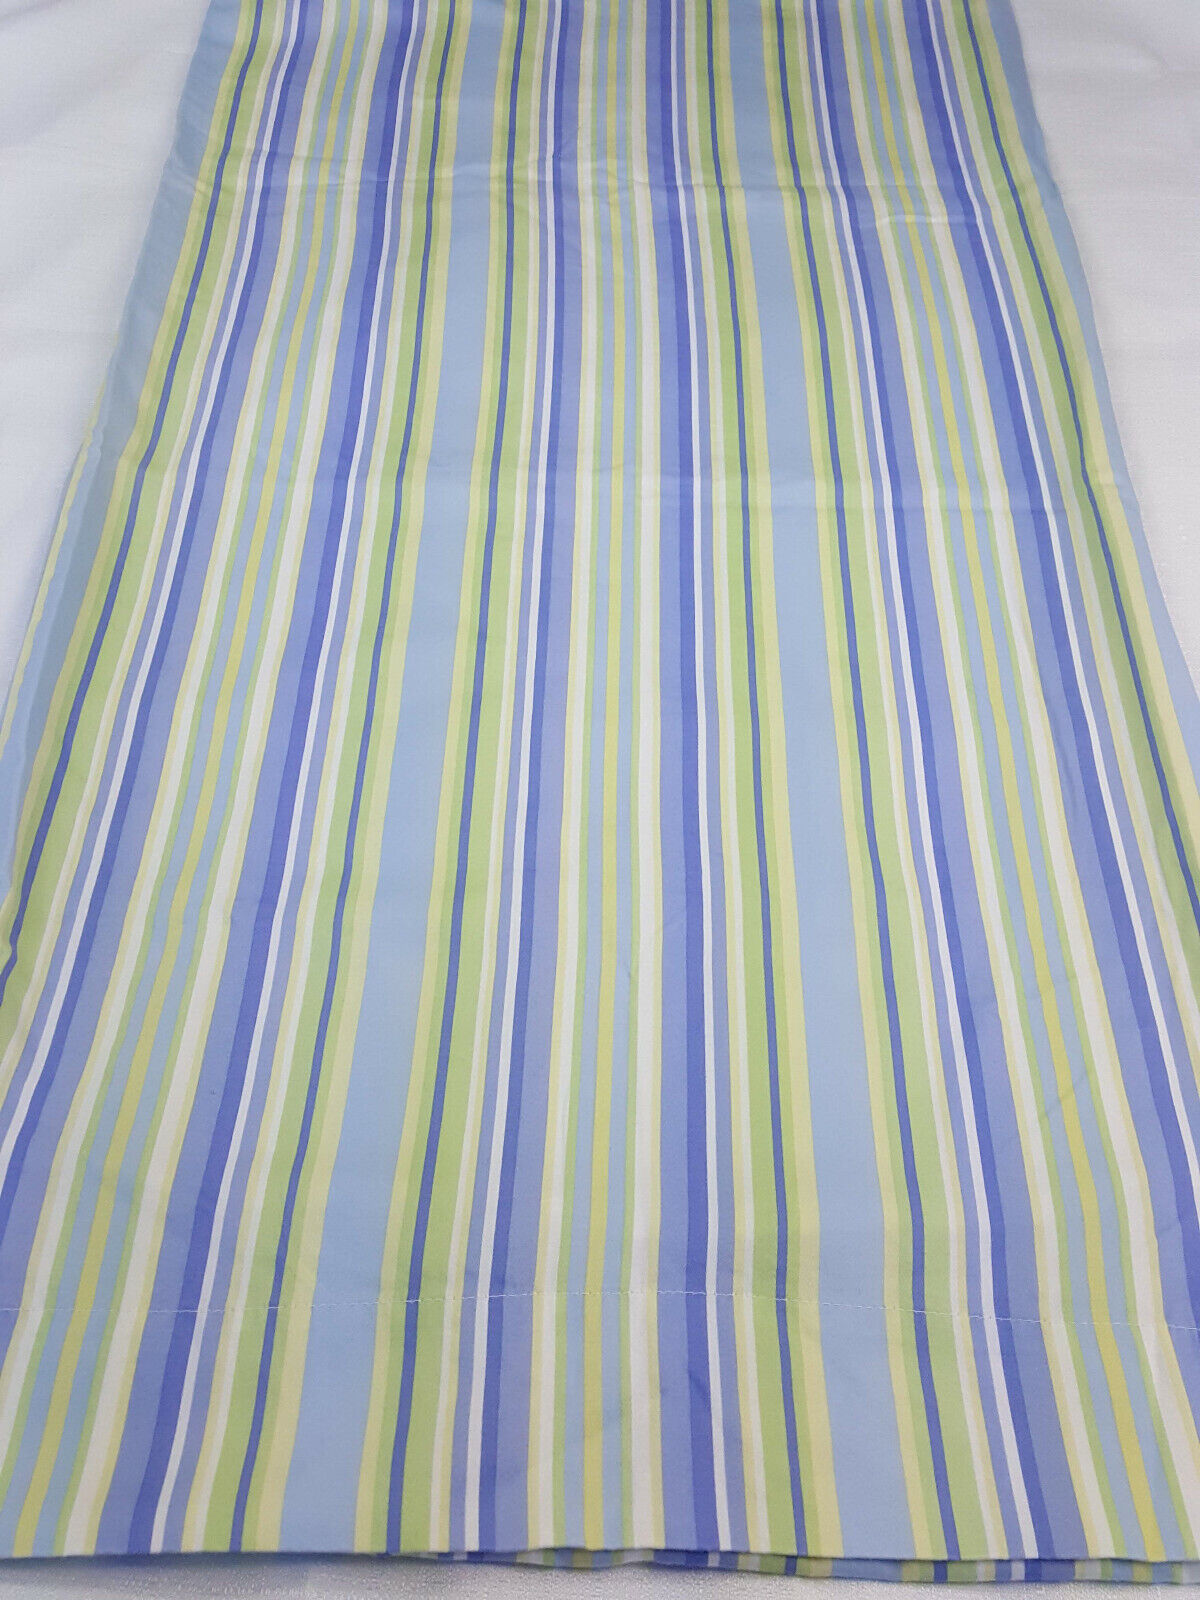 One King Pillowcase Striped Blue Green White Bed Bedroom Decor